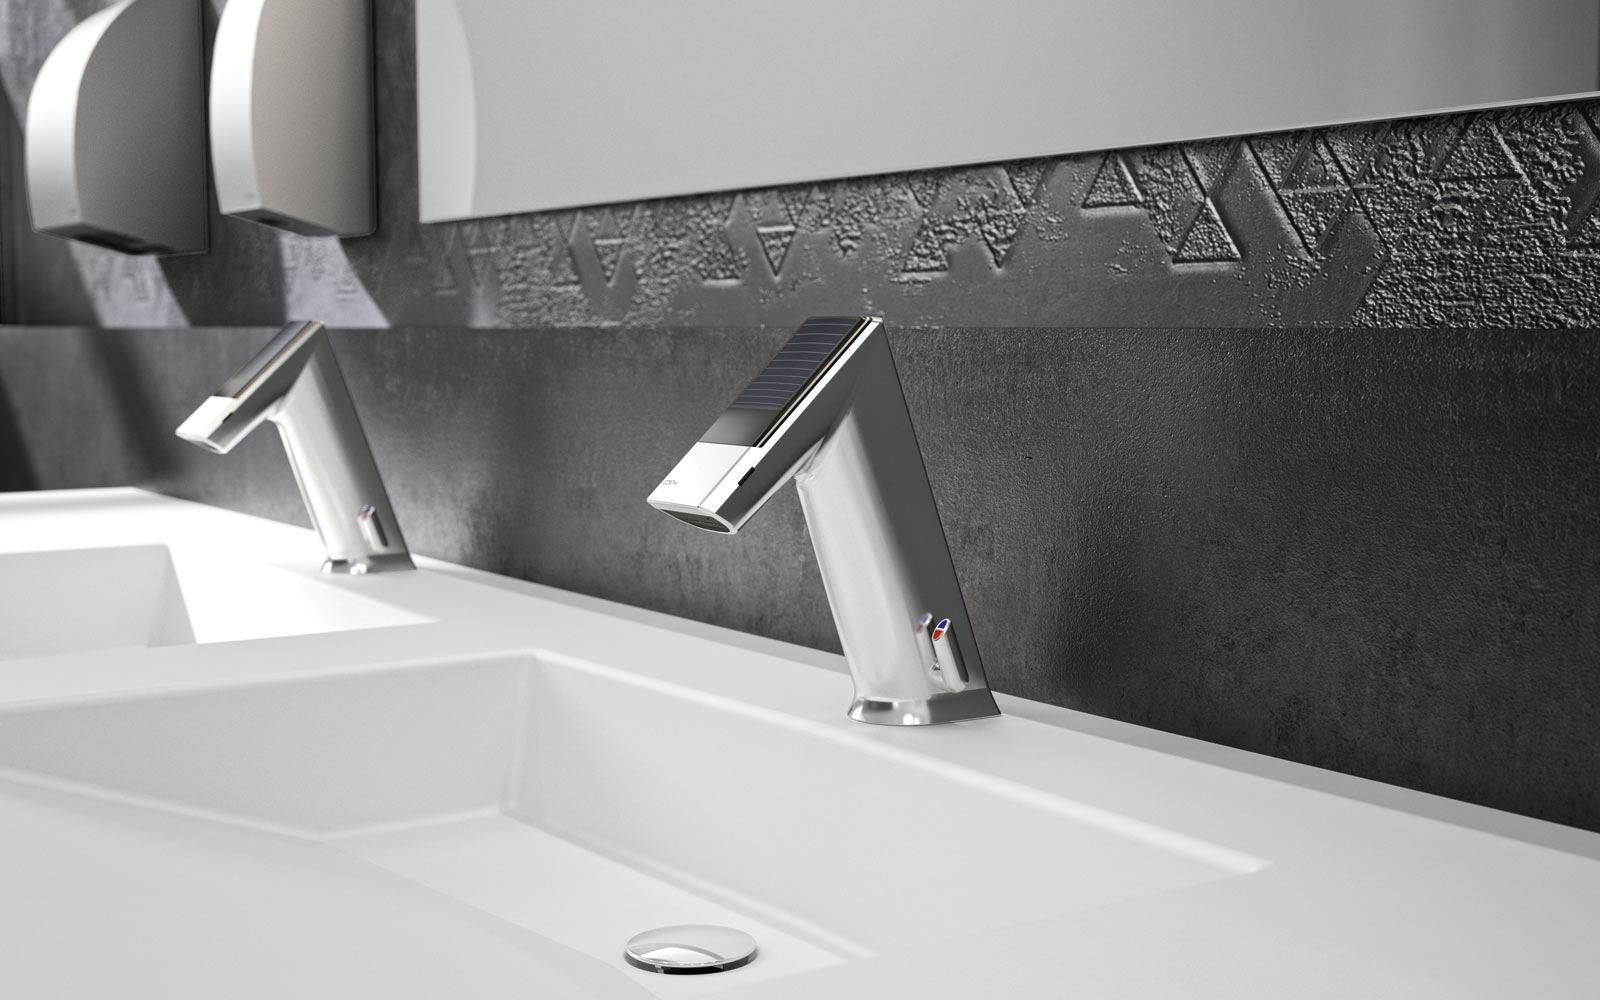 Faucets with various power options